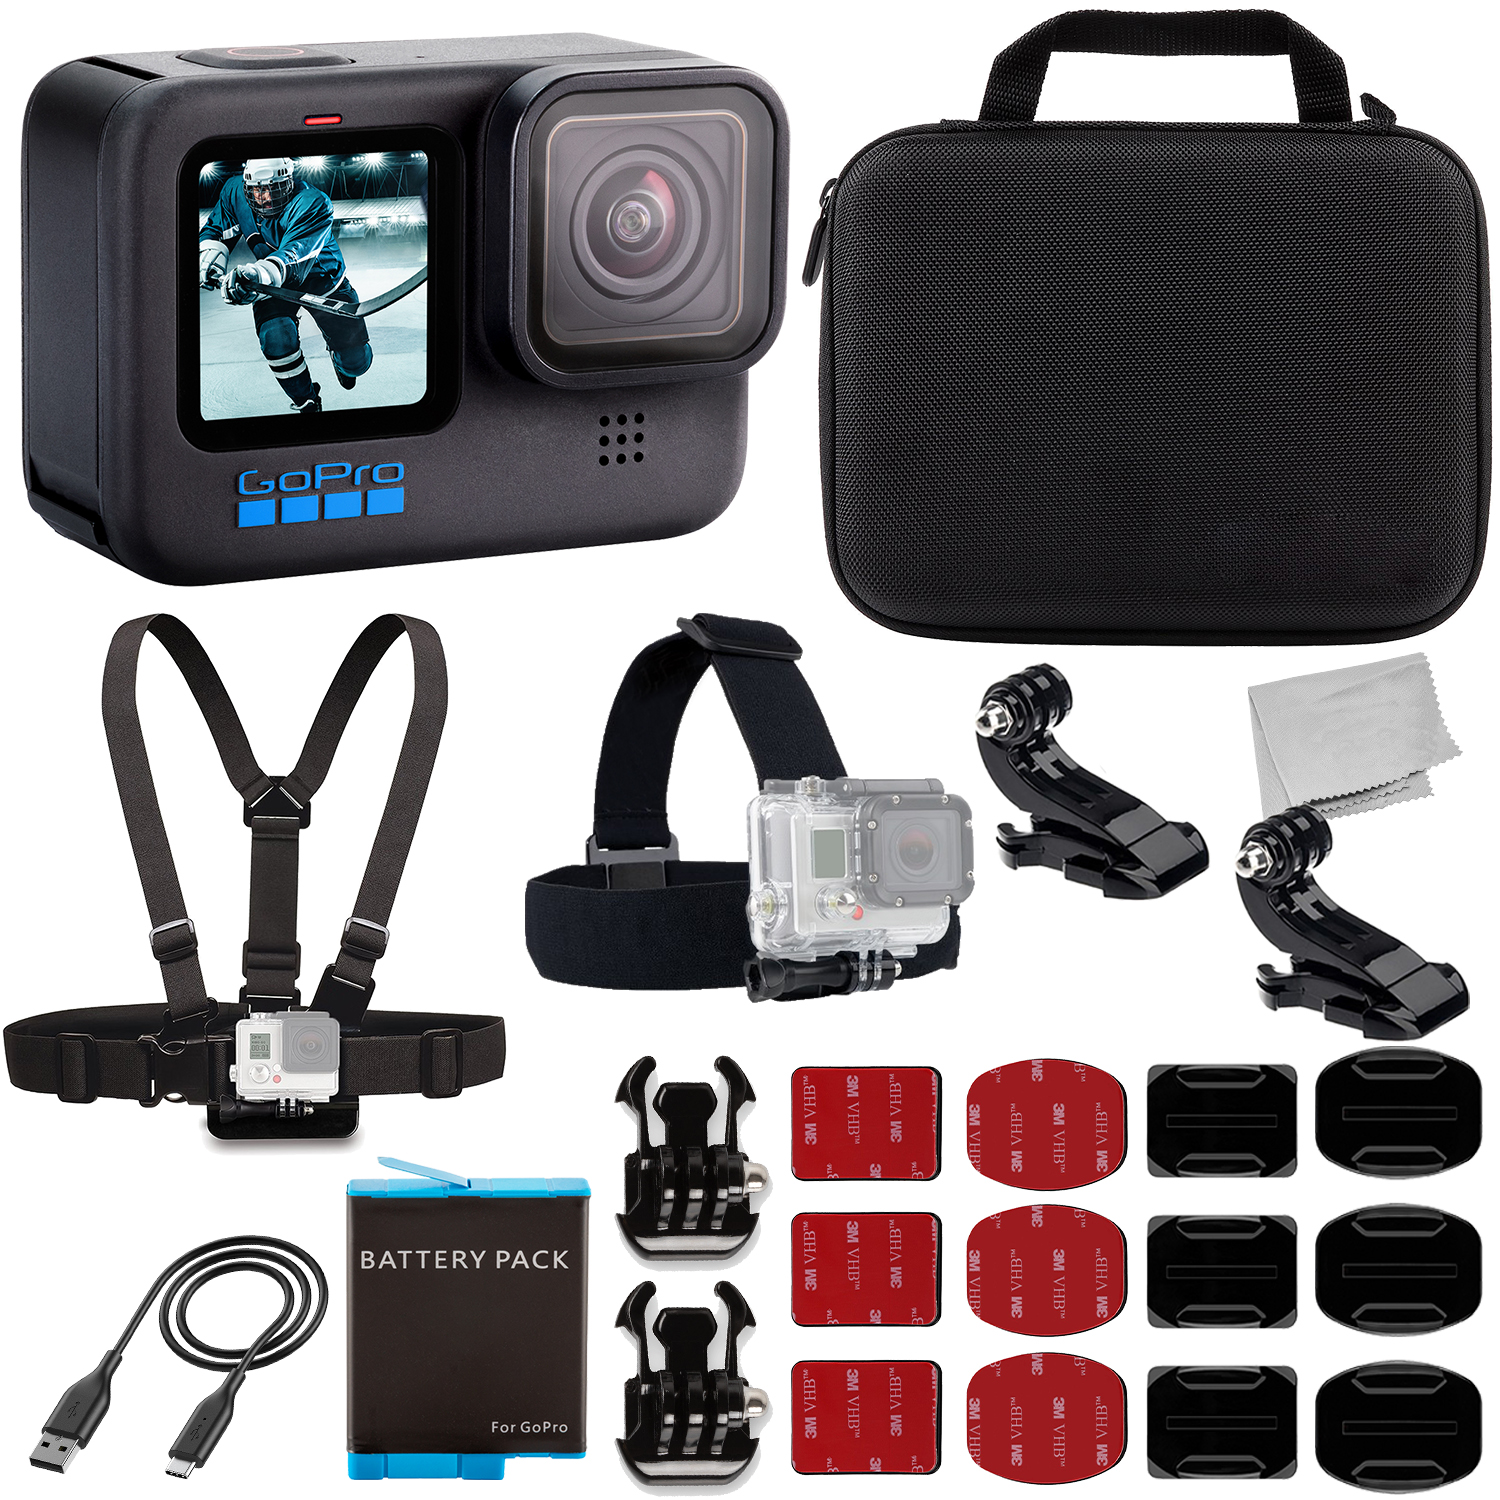 GoPro HERO10 (Hero 10) Black with Starter Accessory Bundle: 1x Replacement Batteries, Water Resistant Action Camera Case, Chest & Head Straps with Action Camera Mount & Much More